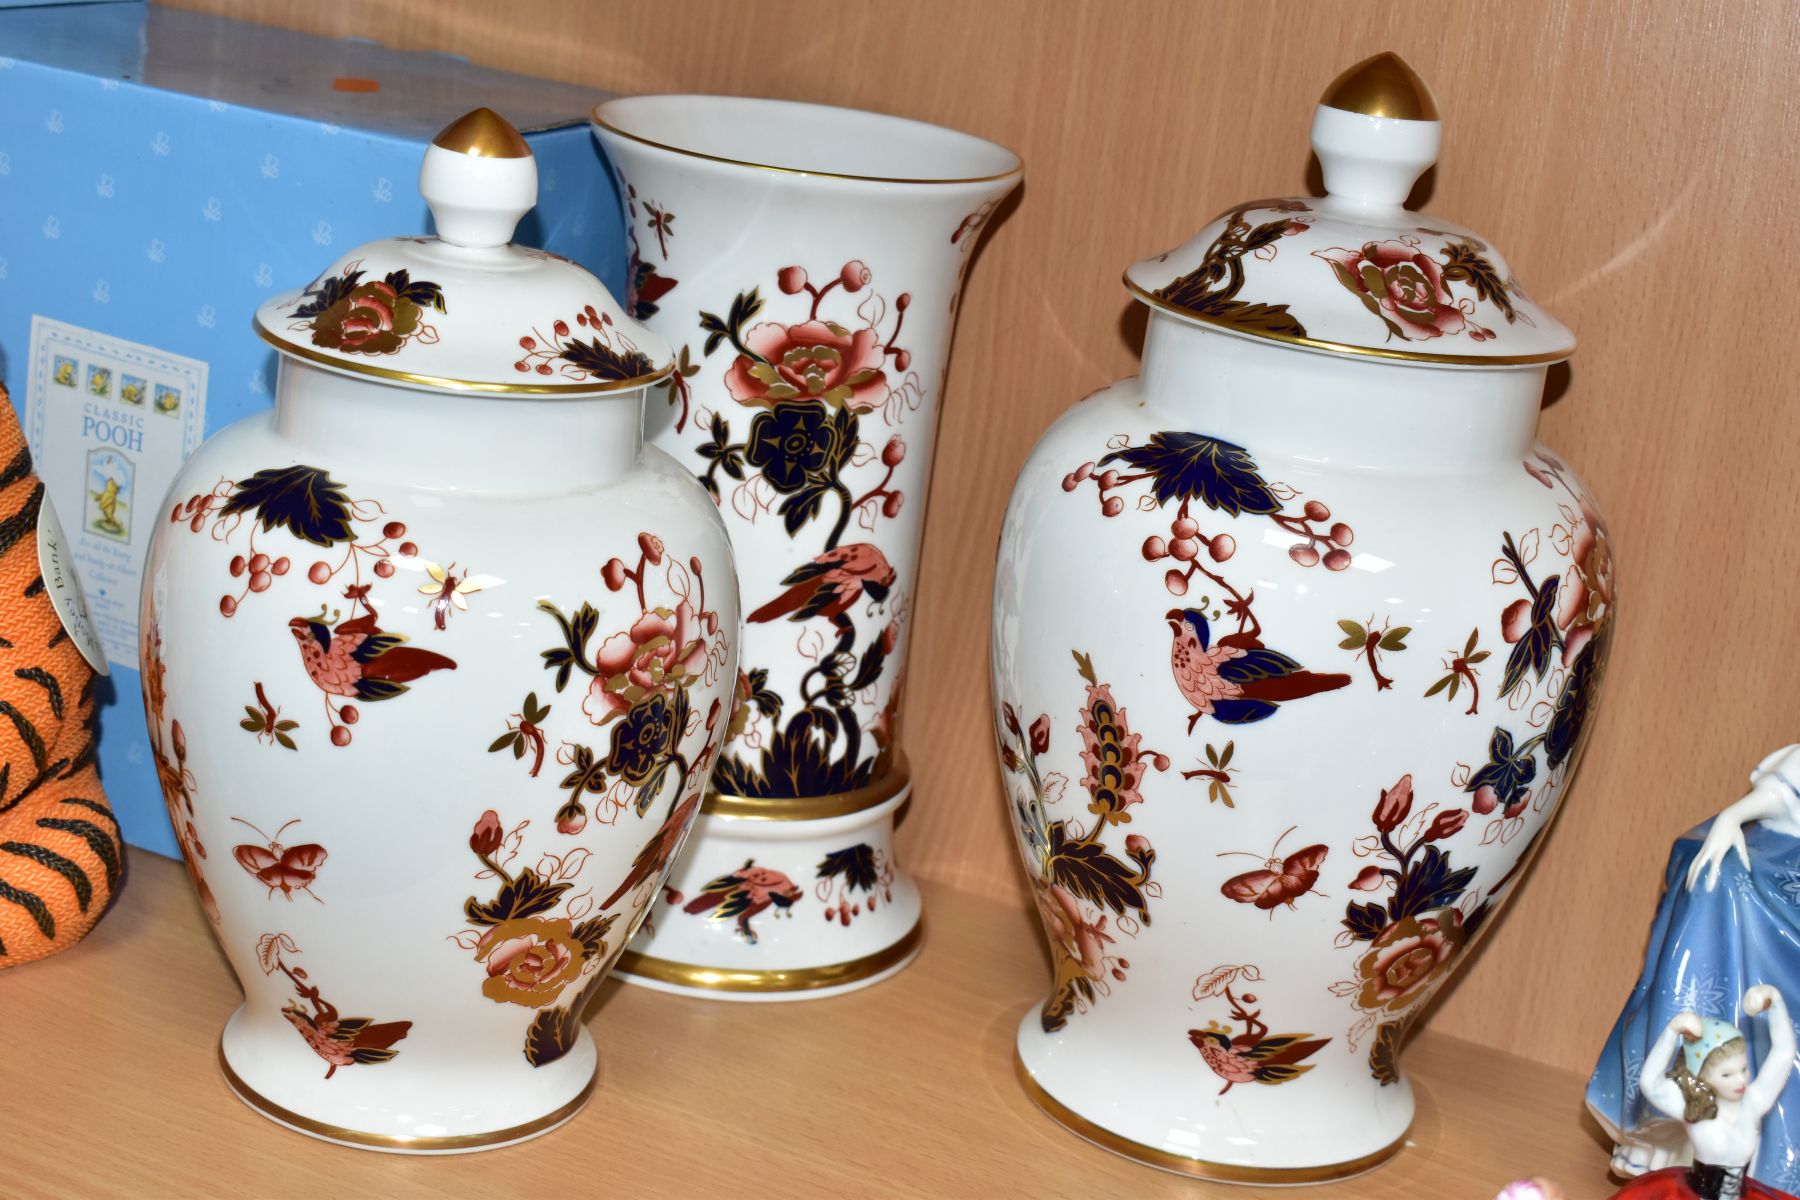 SIX PIECES OF COALPORT HONG KONG CERAMIC WARES, comprising two covered vases heights approximately - Image 5 of 8